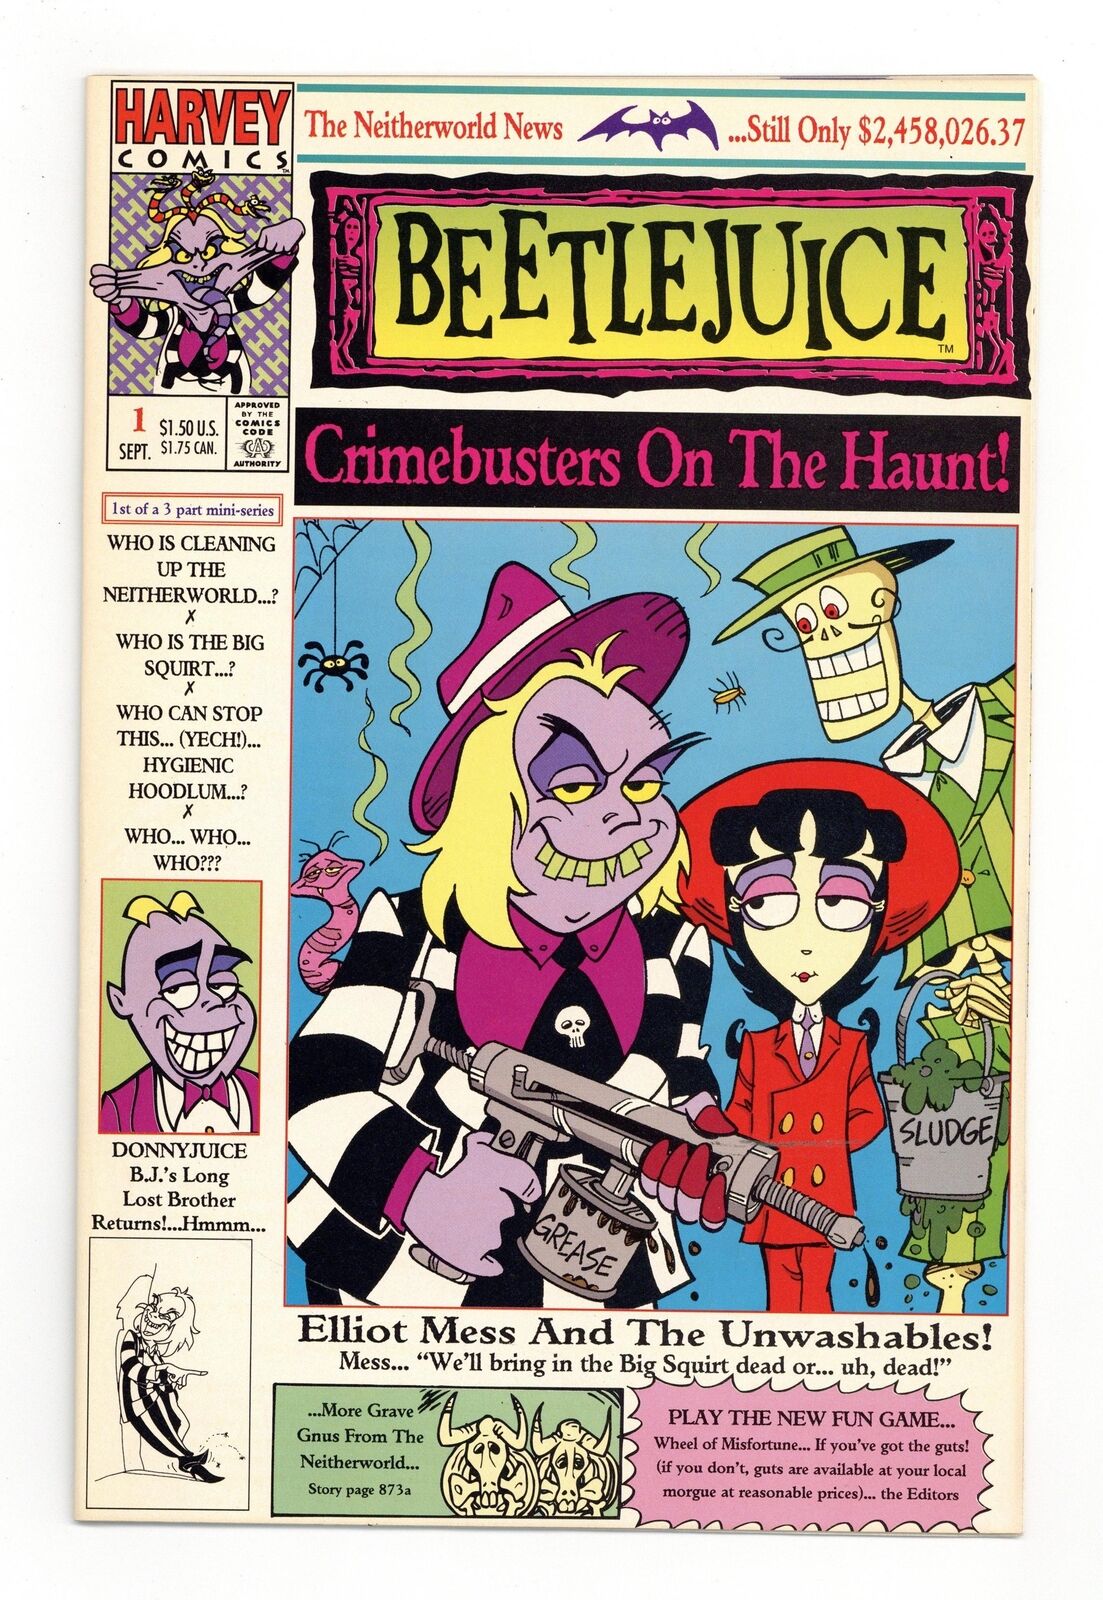 Beetlejuice Crimebusters on the Haunt #1 FN/VF 7.0 1992